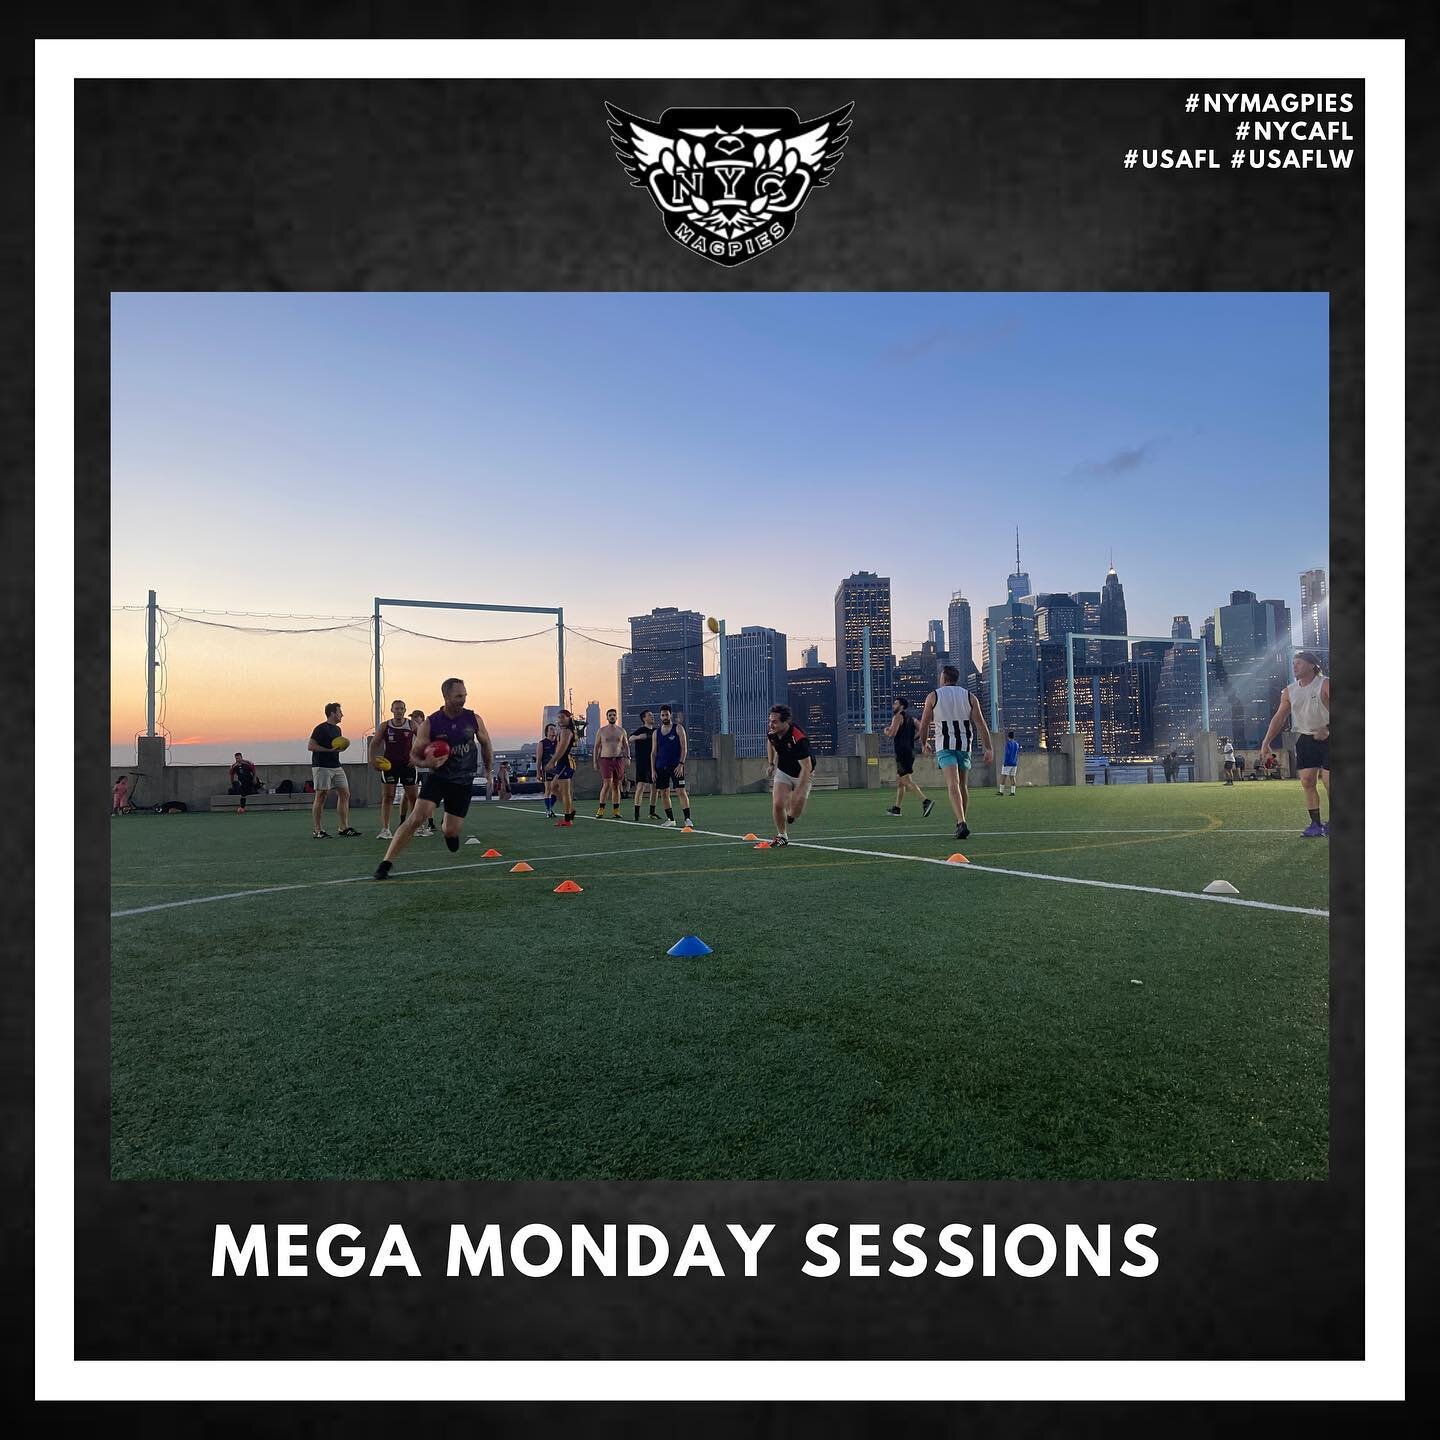 MEGA MONDAY SESSIONS 🤝
#NewYorkMagpies #hotpies #nyc